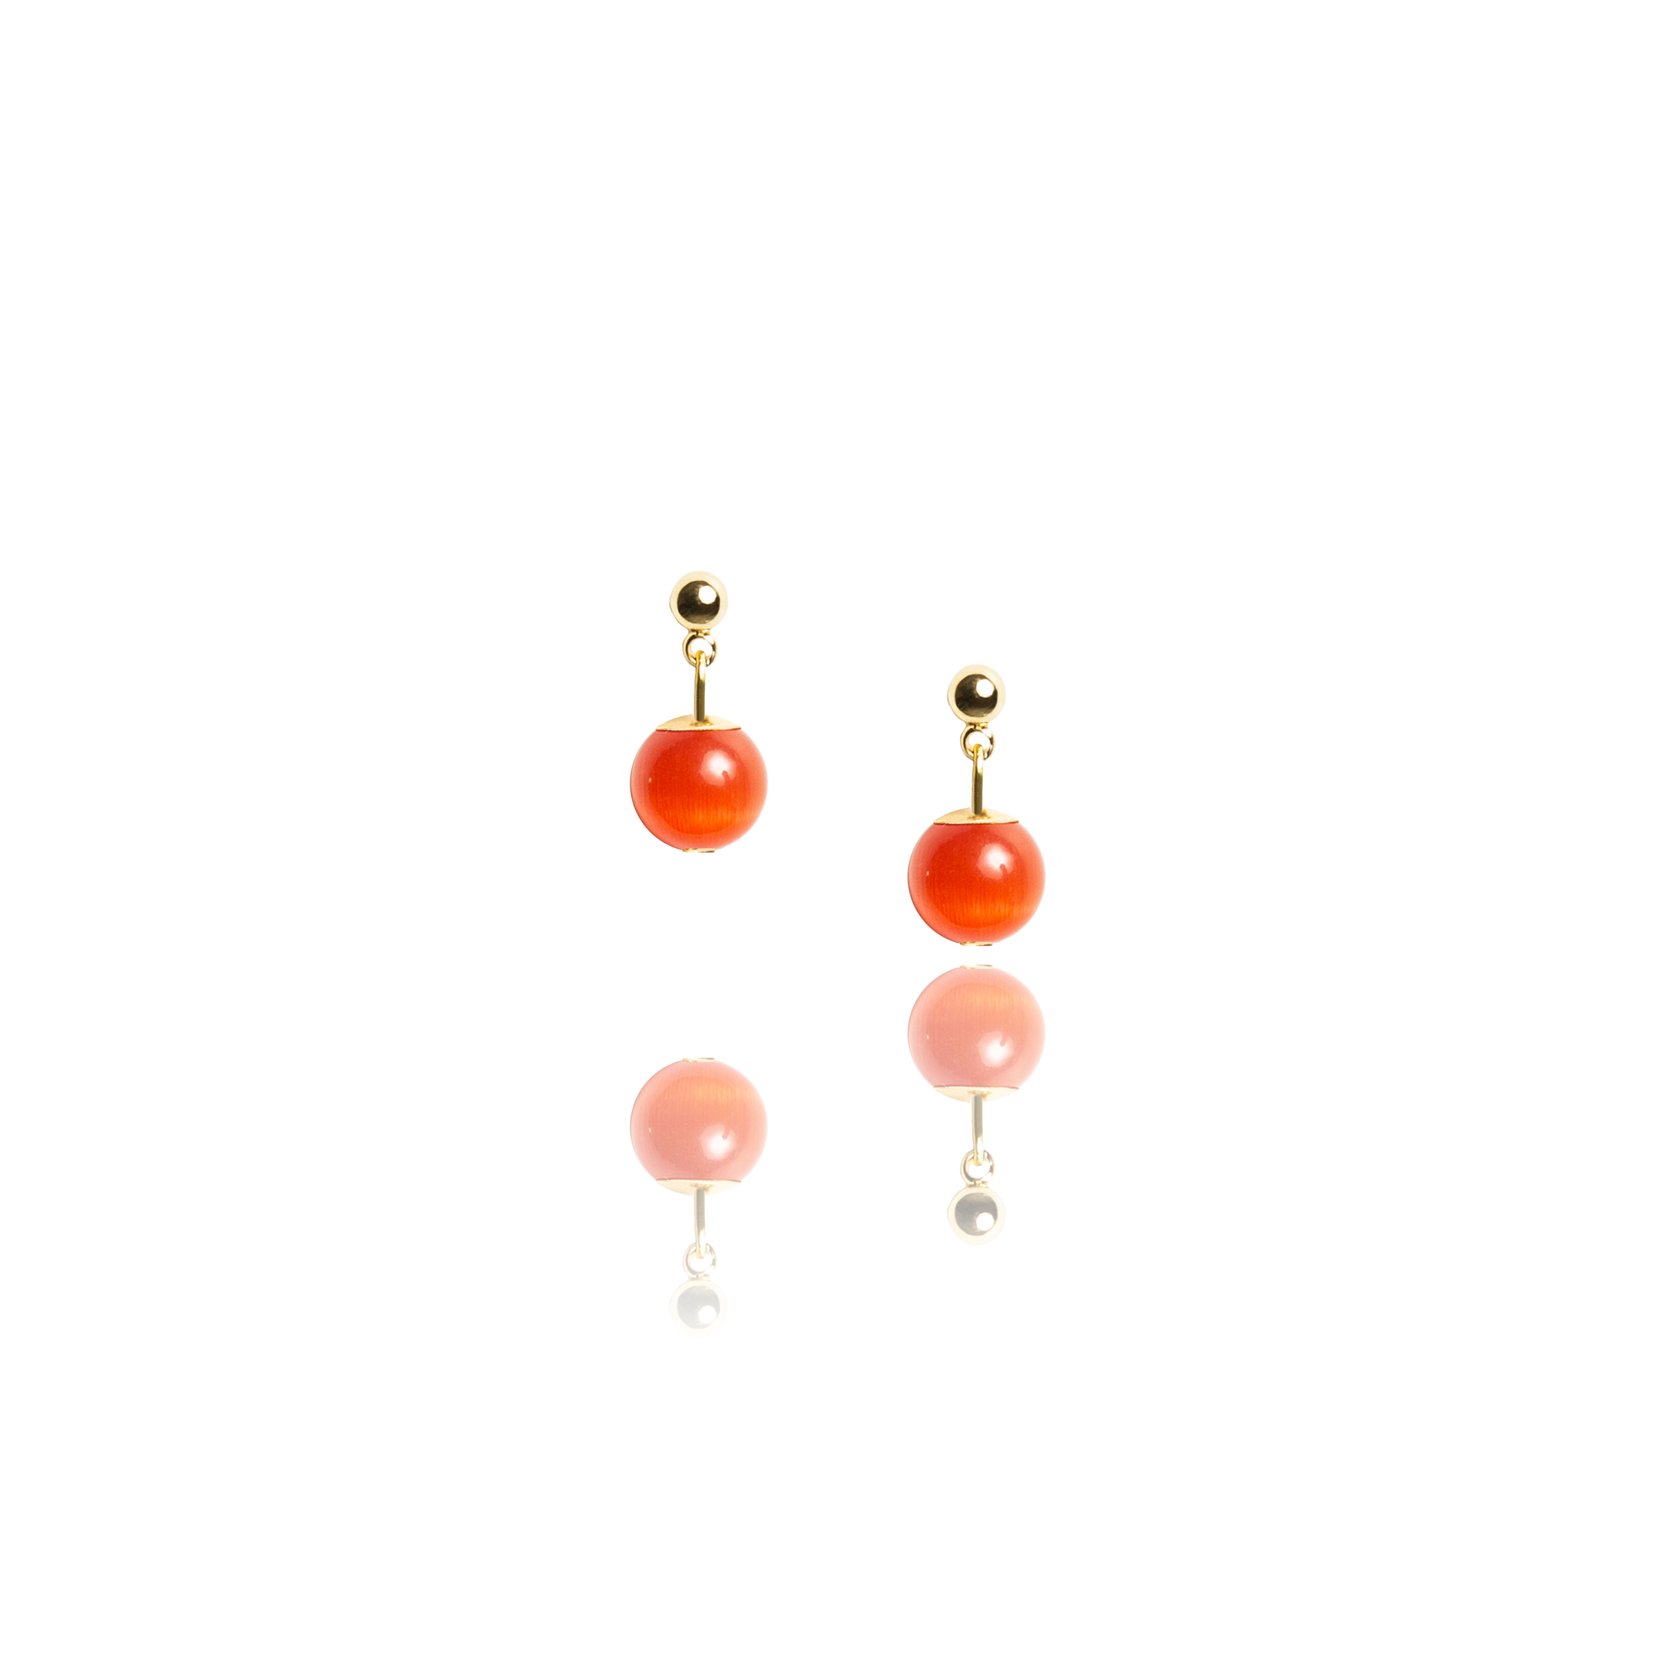 Small stud earrings with an orange stone.